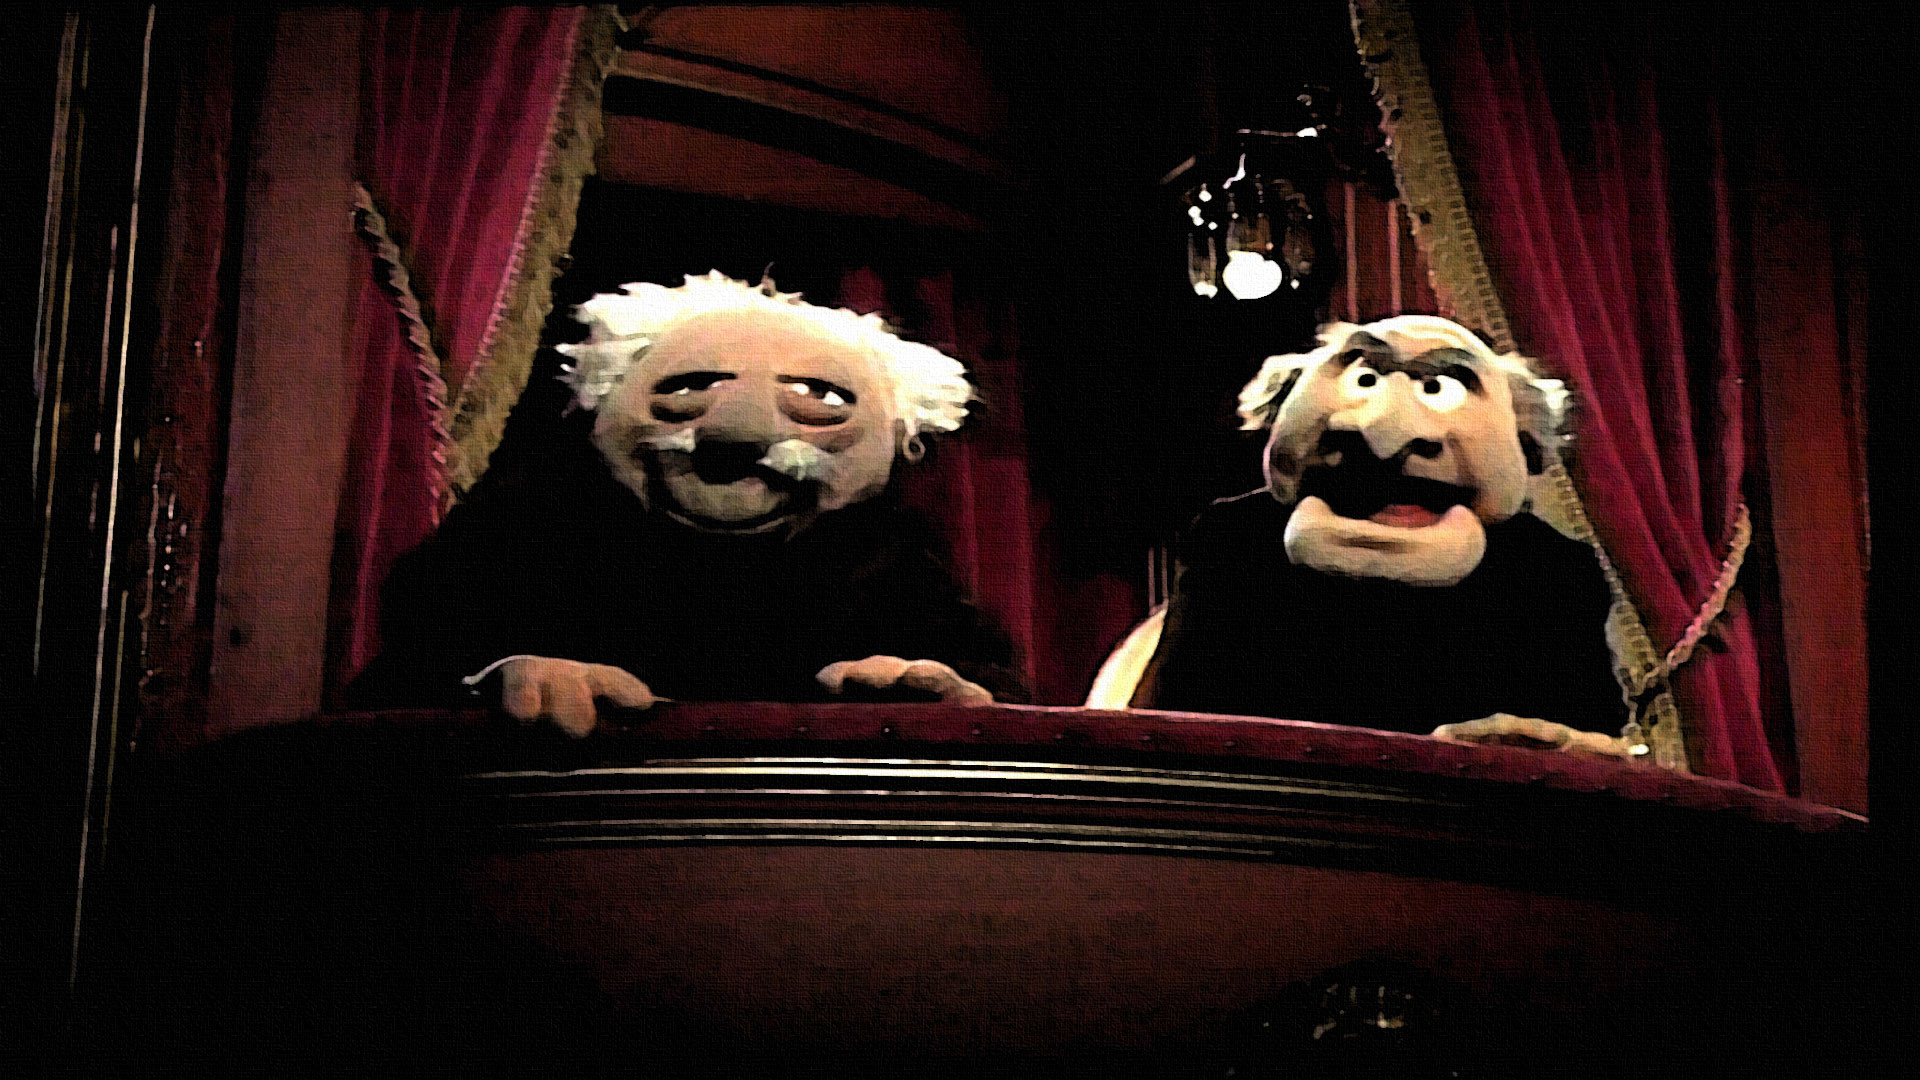 1920x1080 Go Back Images For Muppet Show Wallpaper 